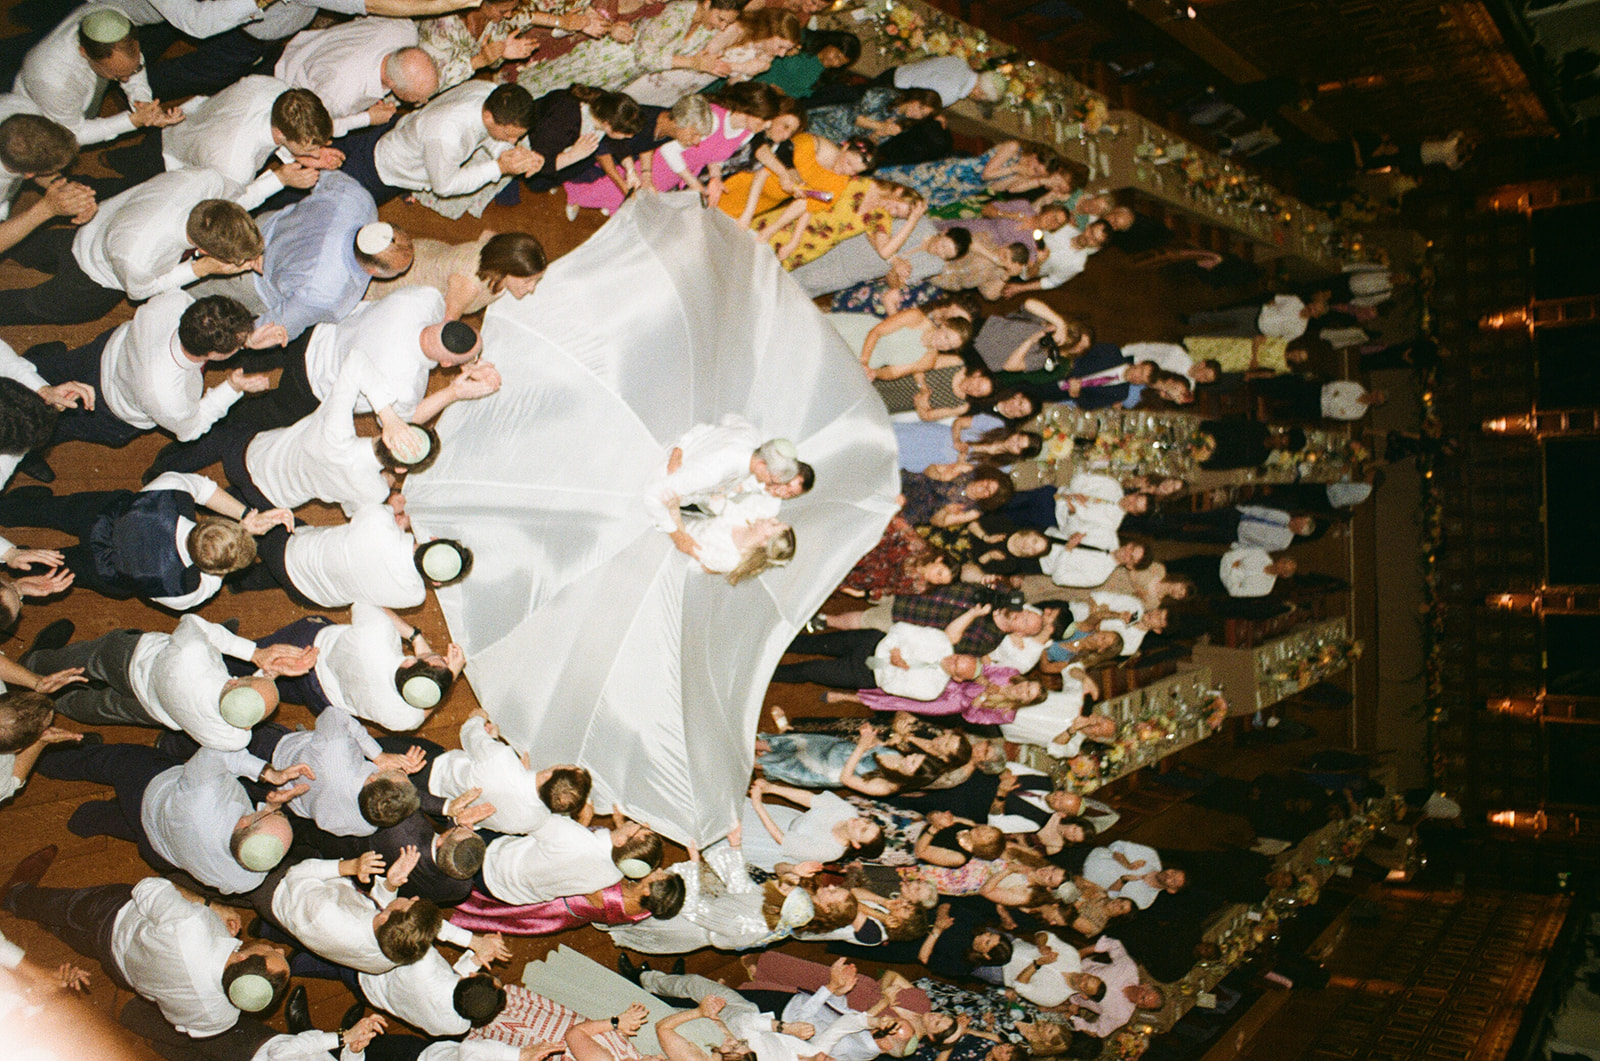 Traditional Jewish wedding dance where couple are in the middle of large white sheet